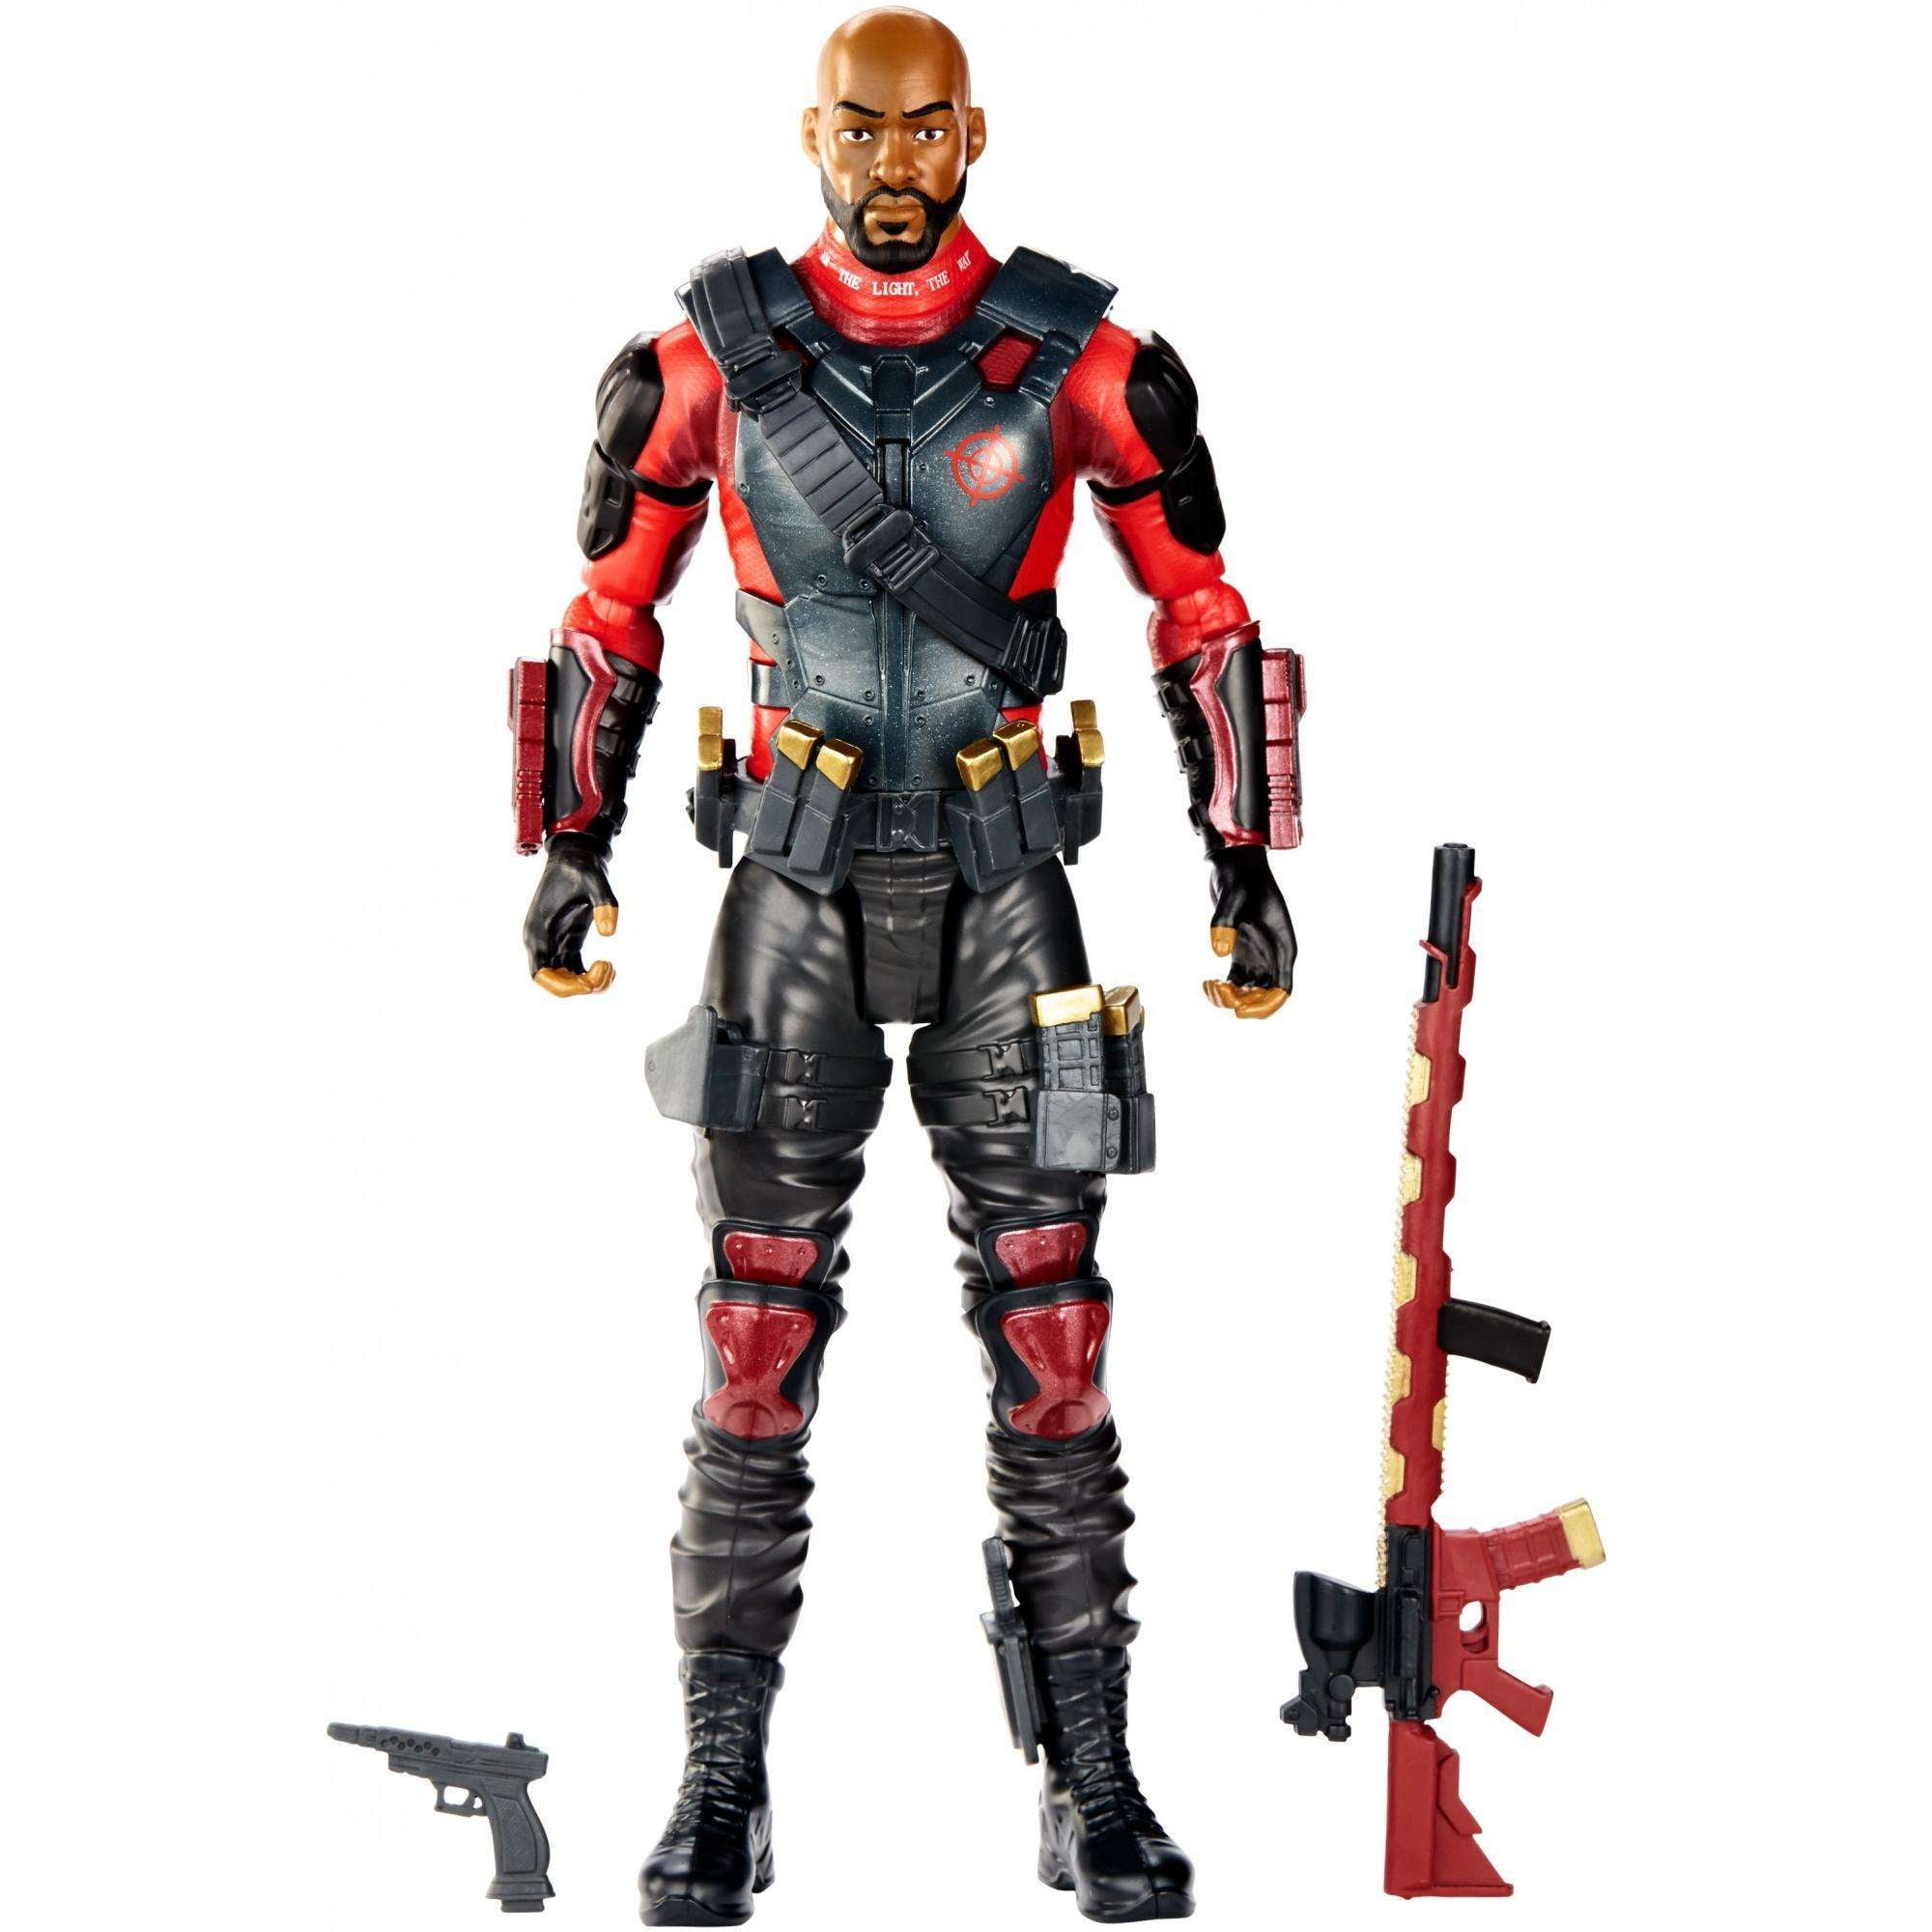 JADA 6" METALS SUICIDE SQUAD DEADSHOT WITH MASK AND WEAPON DIECAST FIGURE 97947